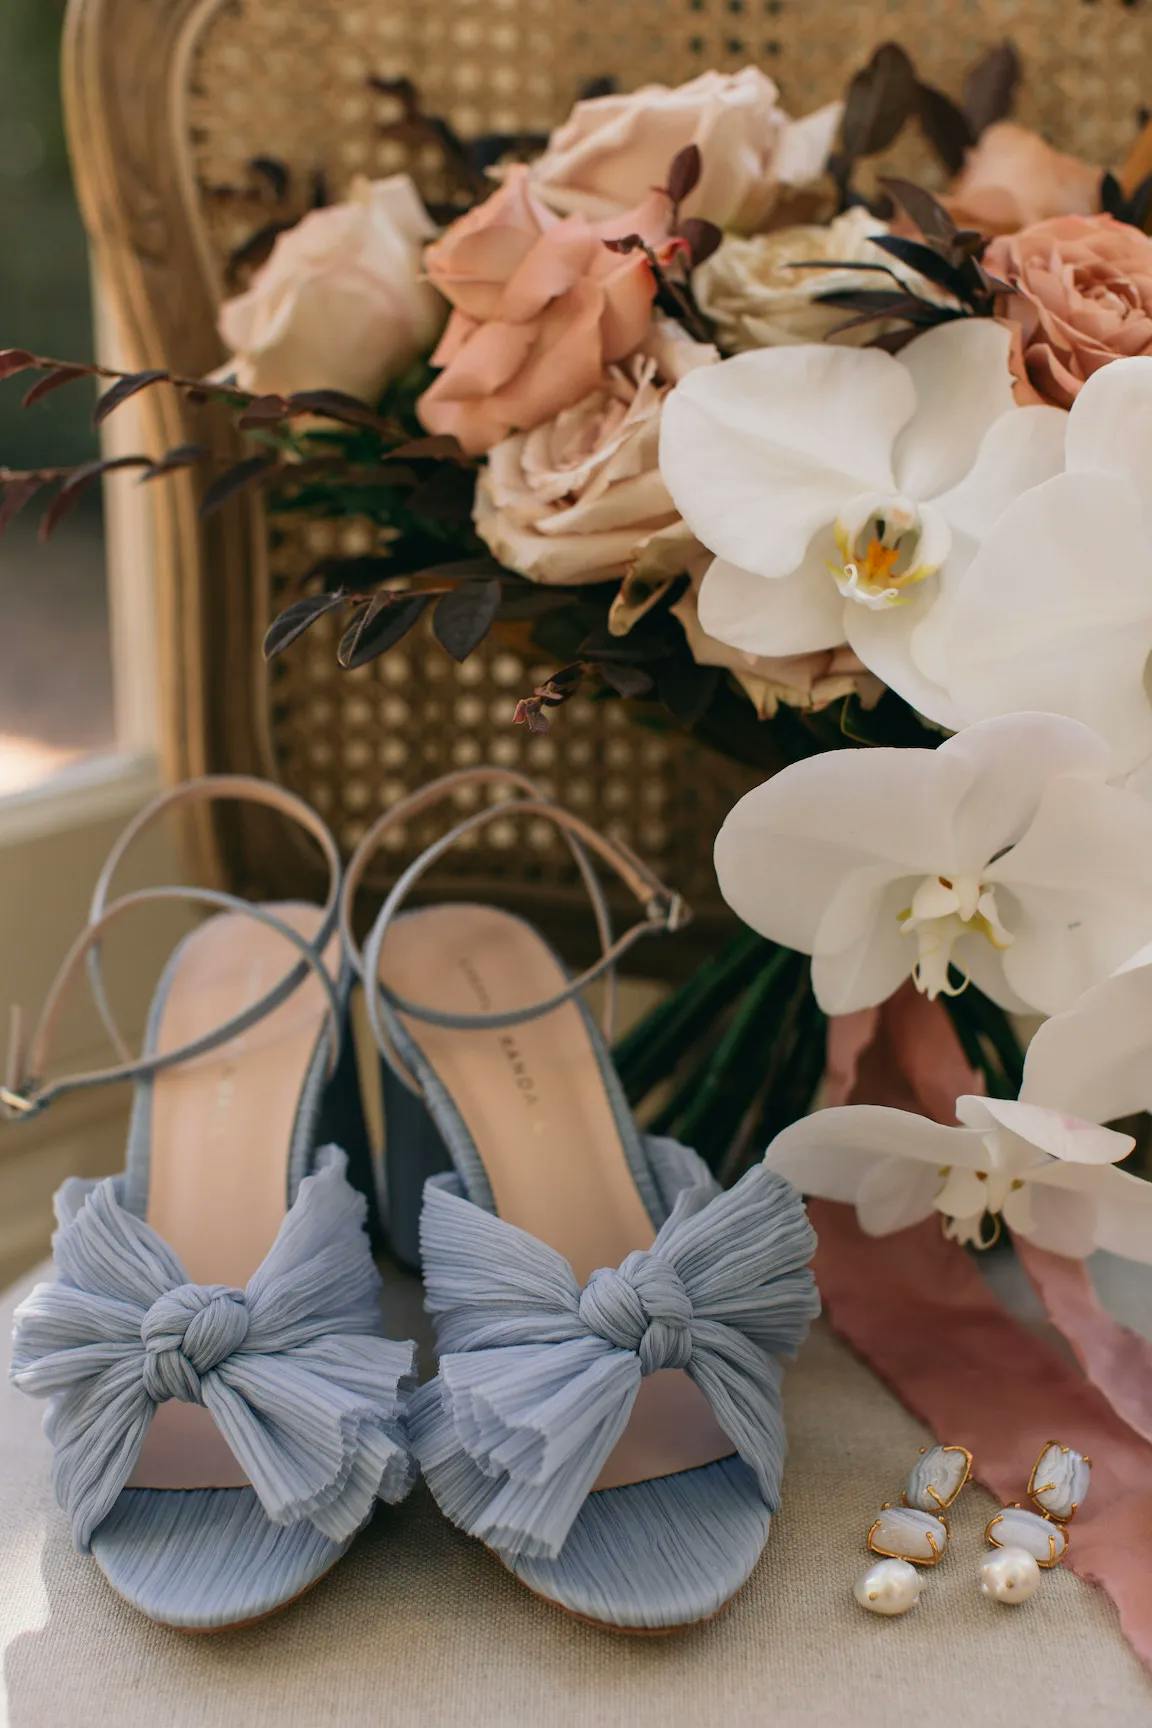 A pair of elegant blue high-heeled shoes with bow accents, placed in front of a lush bouquet of flowers featuring white orchids and peach-colored roses. The scene is completed with a pair of dangling gold and pearl earrings.